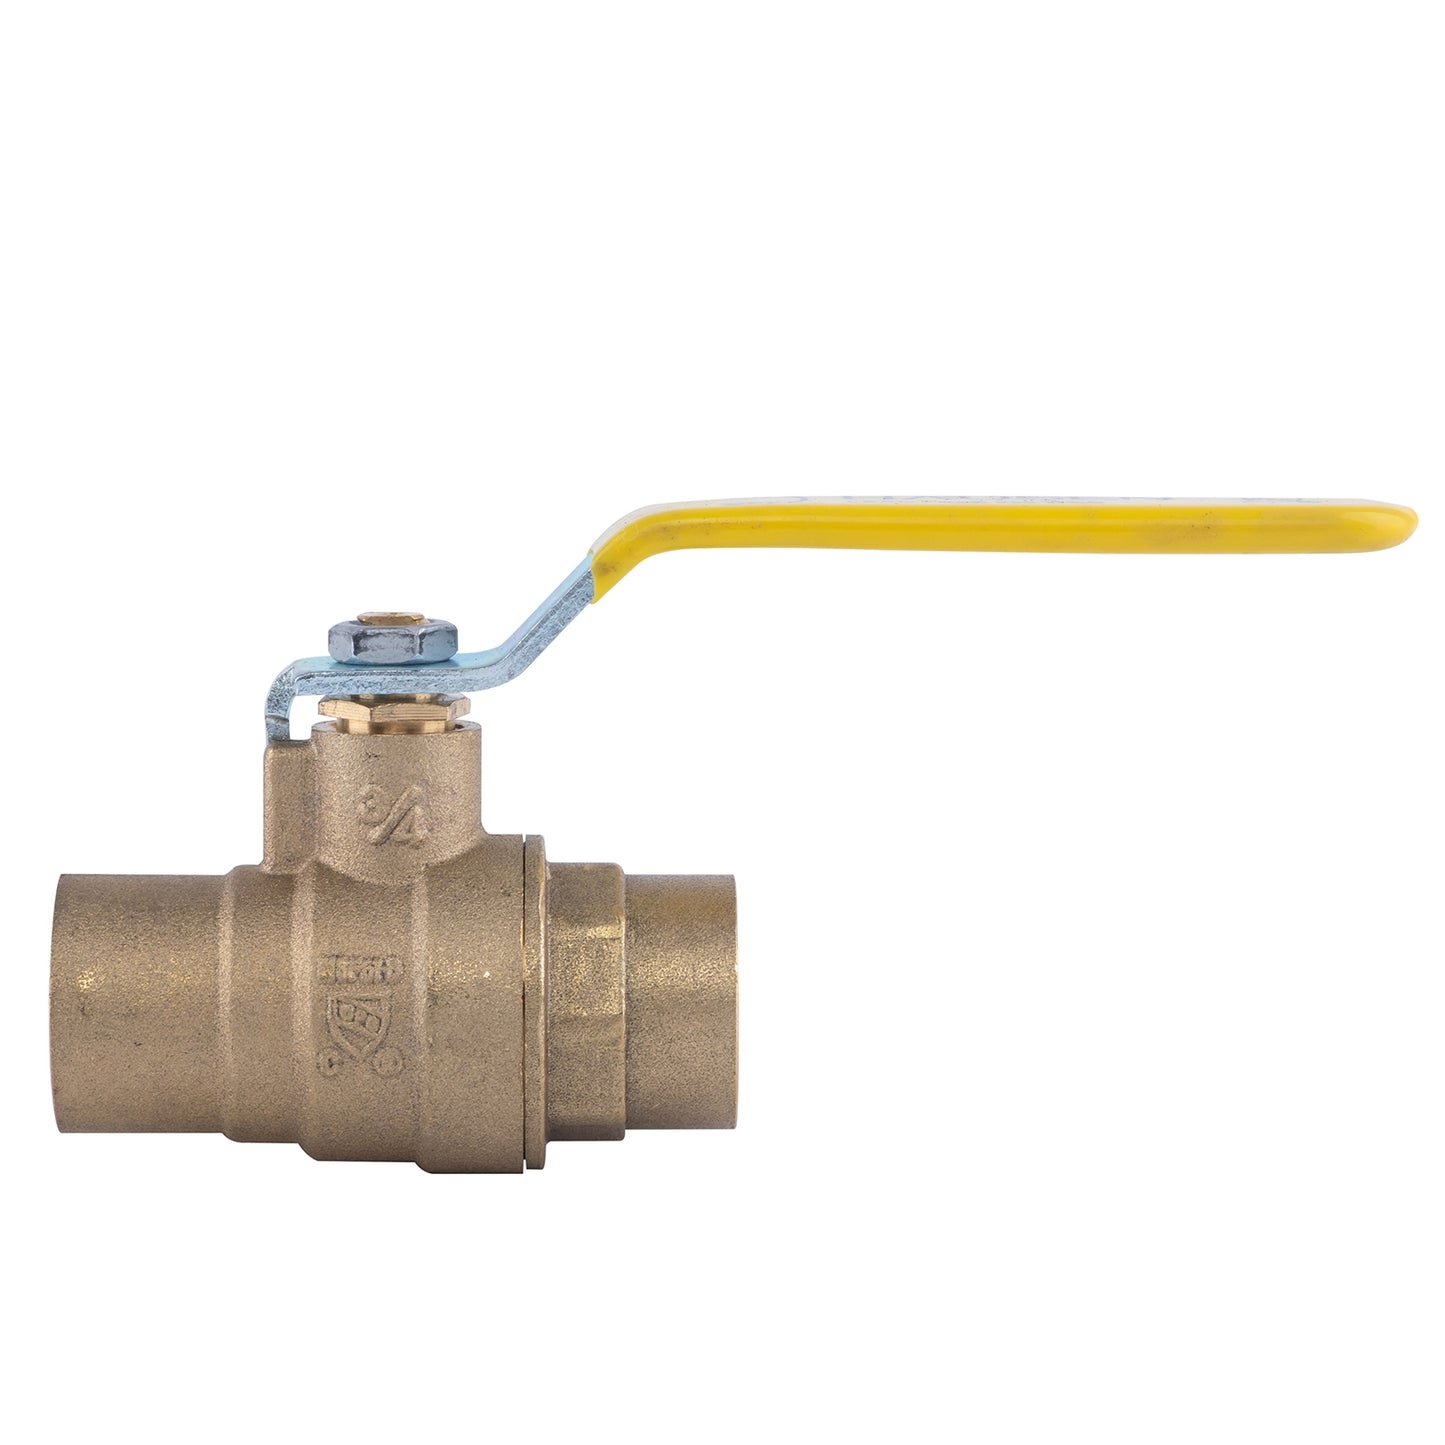 Hausen 3/4-inch Sweat x 3/4-inch Sweat Full Port Brass Ball Valve; Lead Free Forged Brass; Blowout Resistant Stem; cUPC/ANSI/NSF Certified; For Use in Potable Water Distribution Systems, 5-Pack